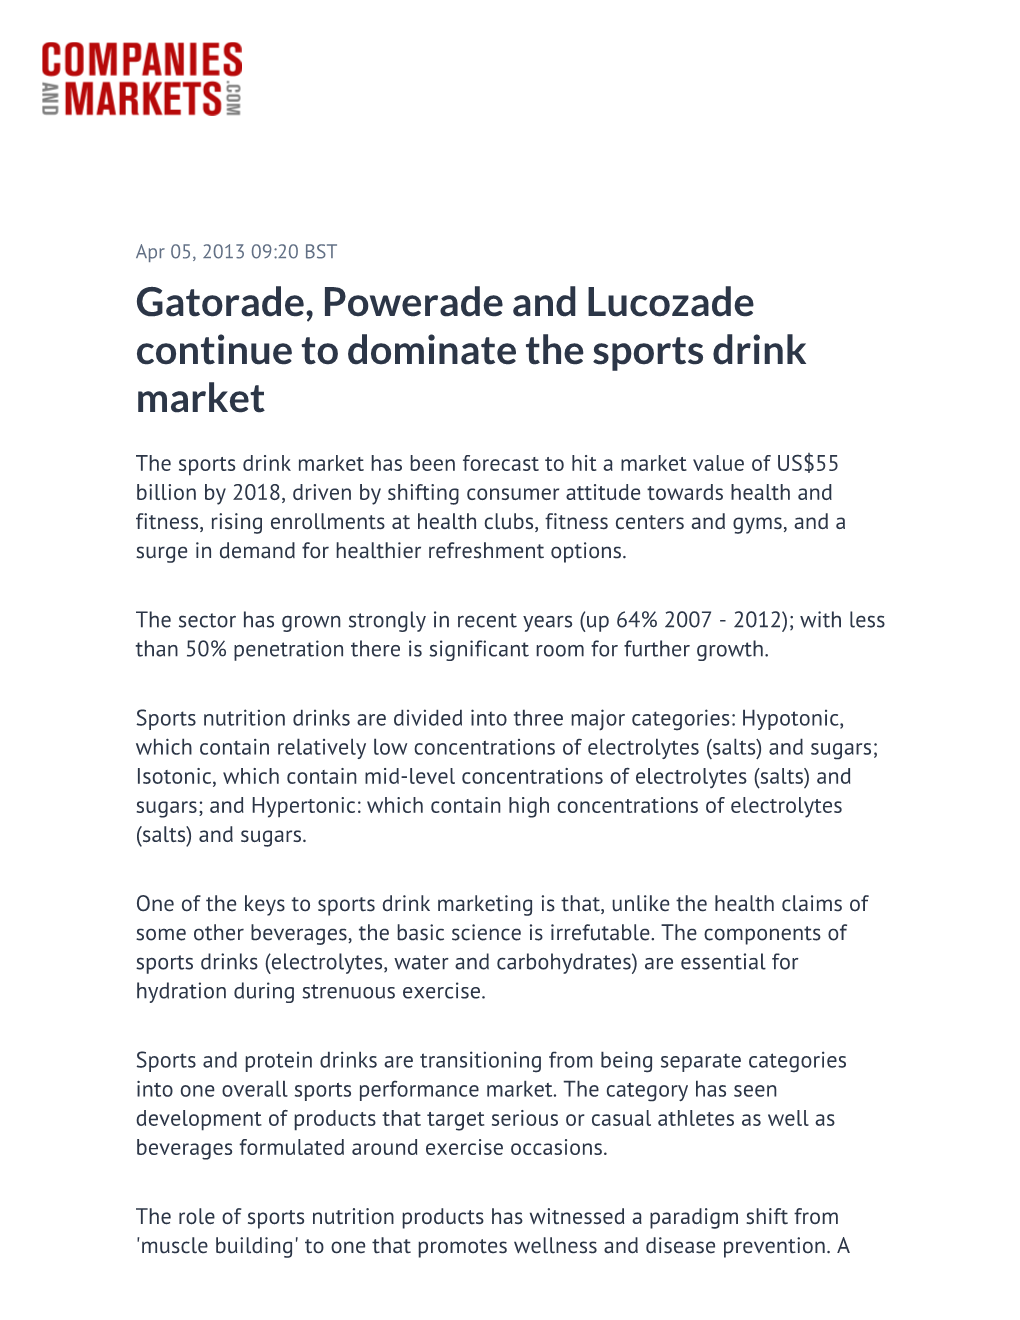 Gatorade, Powerade and Lucozade Continue to Dominate the Sports Drink Market